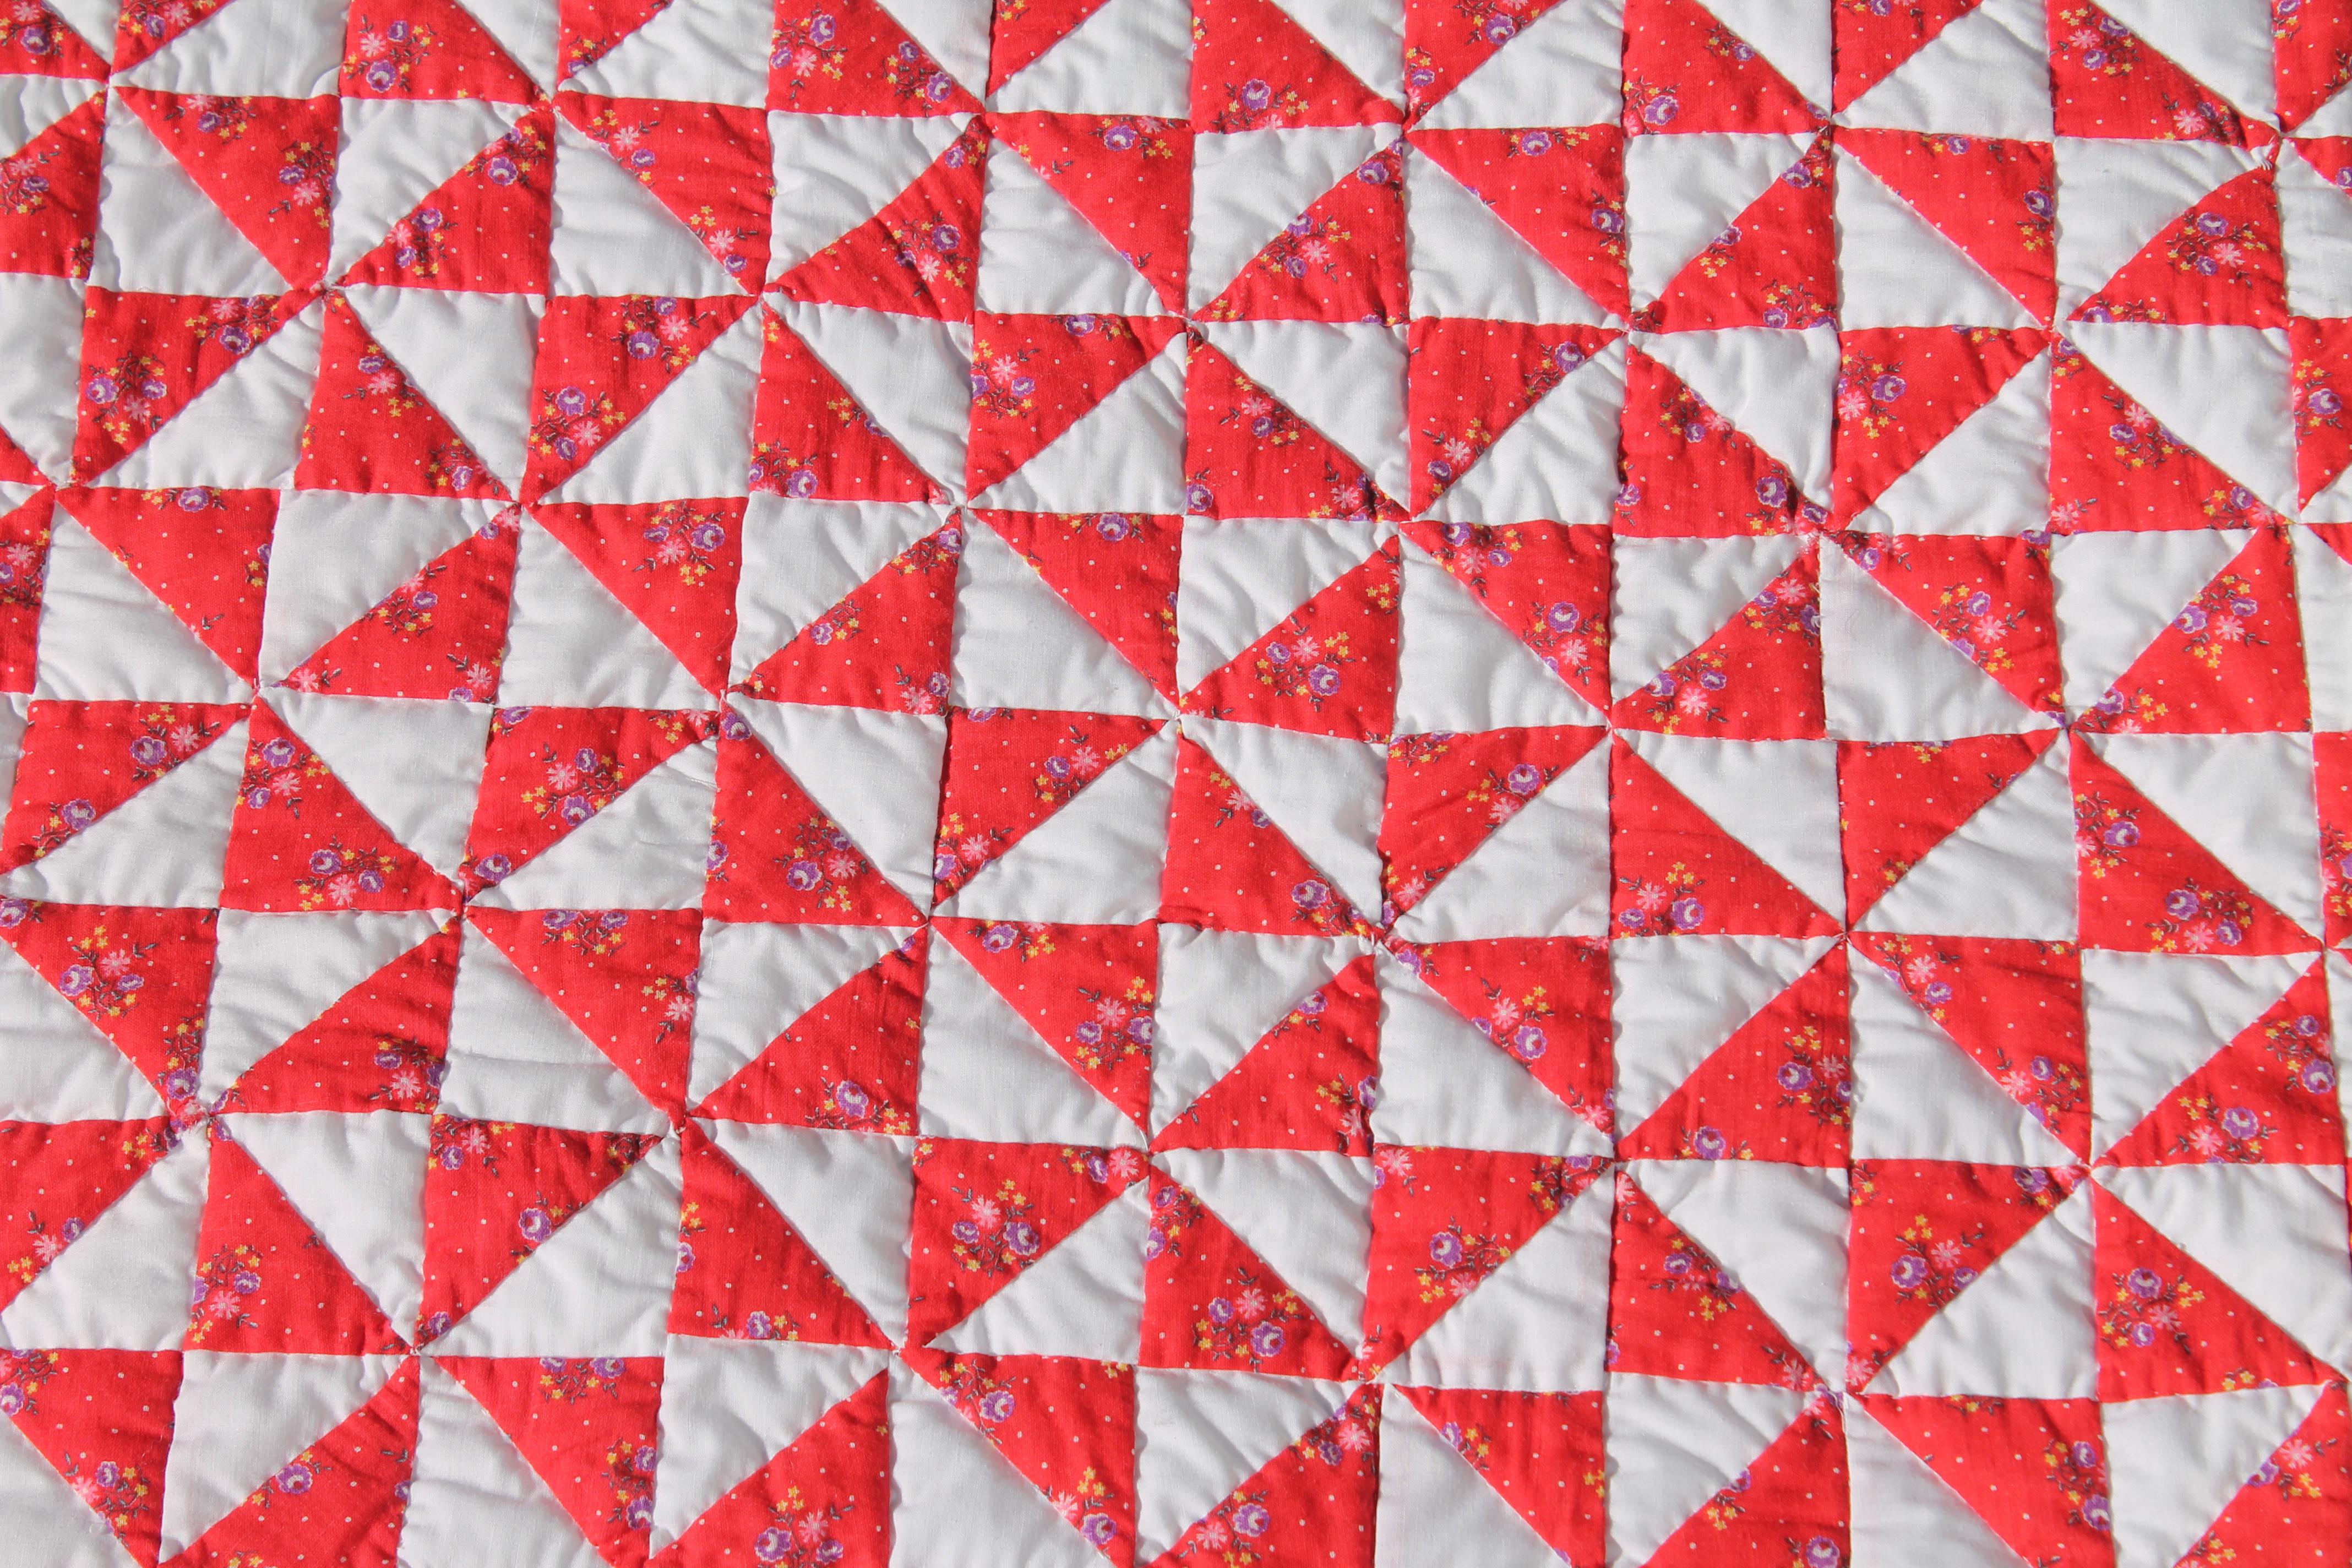 Red and white mini-triangles quilt with double border quilt. The condition is very good.